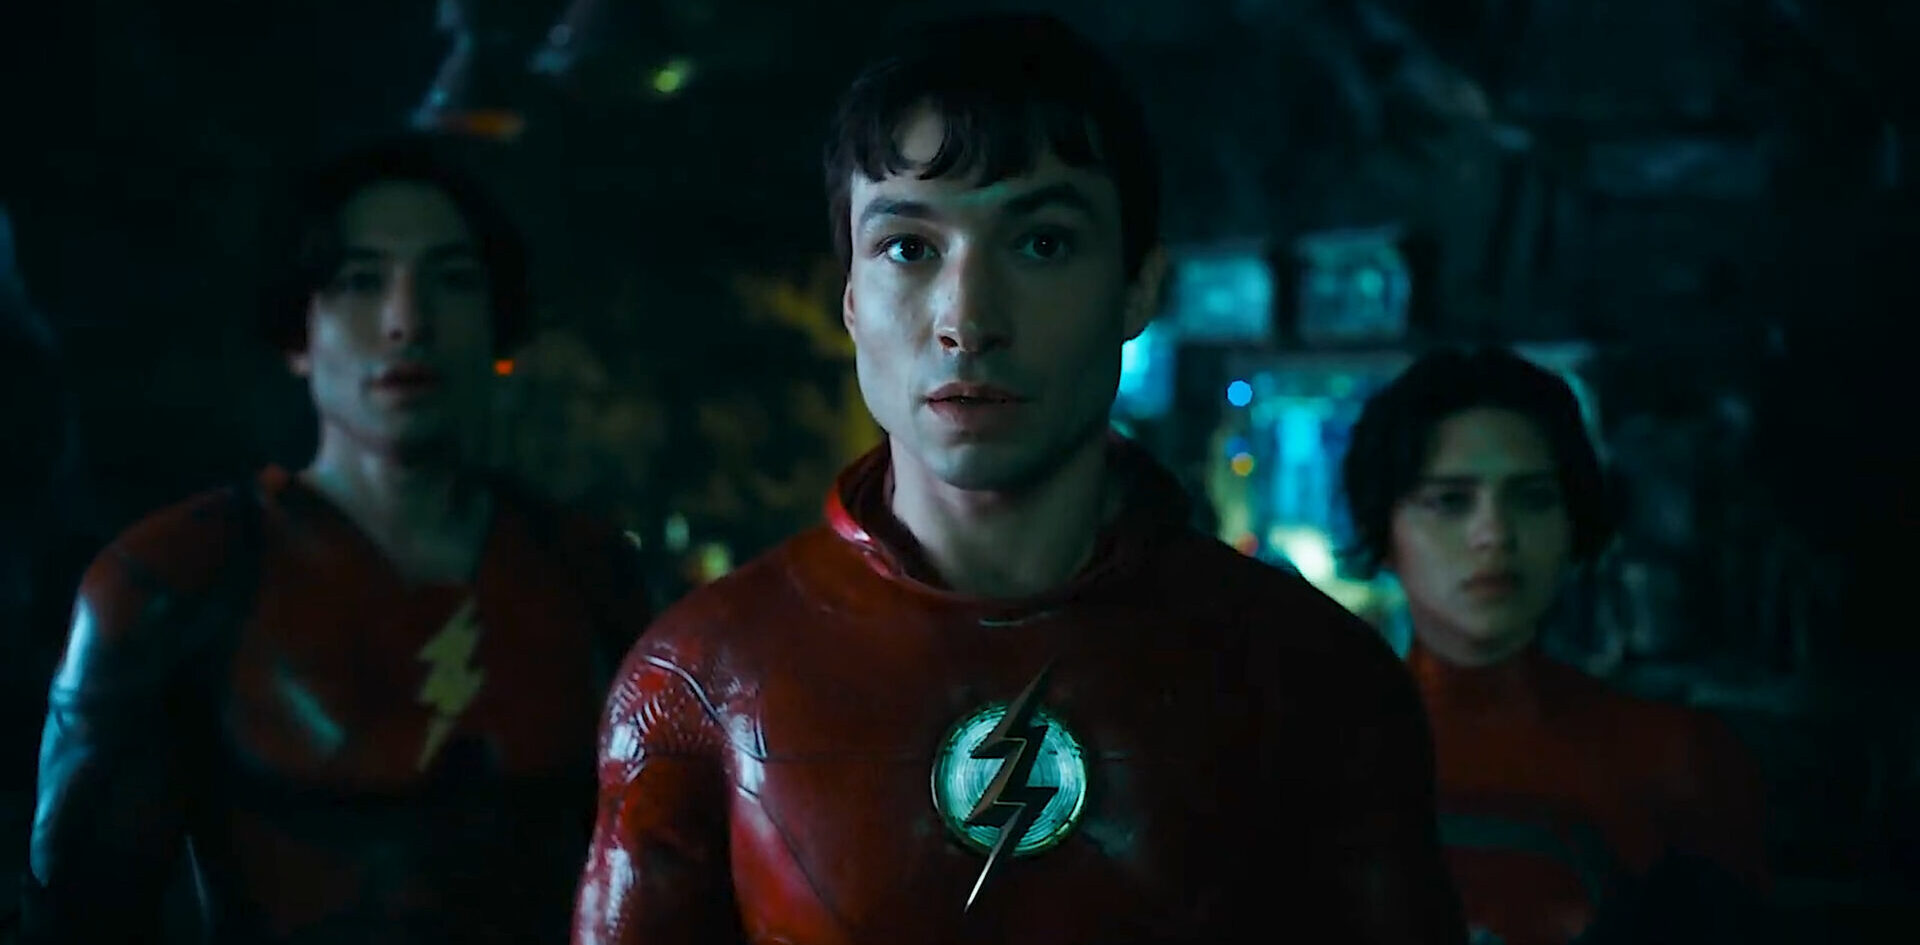 The Flash (Ezra Miller), another Flash (Ezra Miller), and Supergirl (Sasha Calle) in The Flash (2023), Warner Bros. Pictures